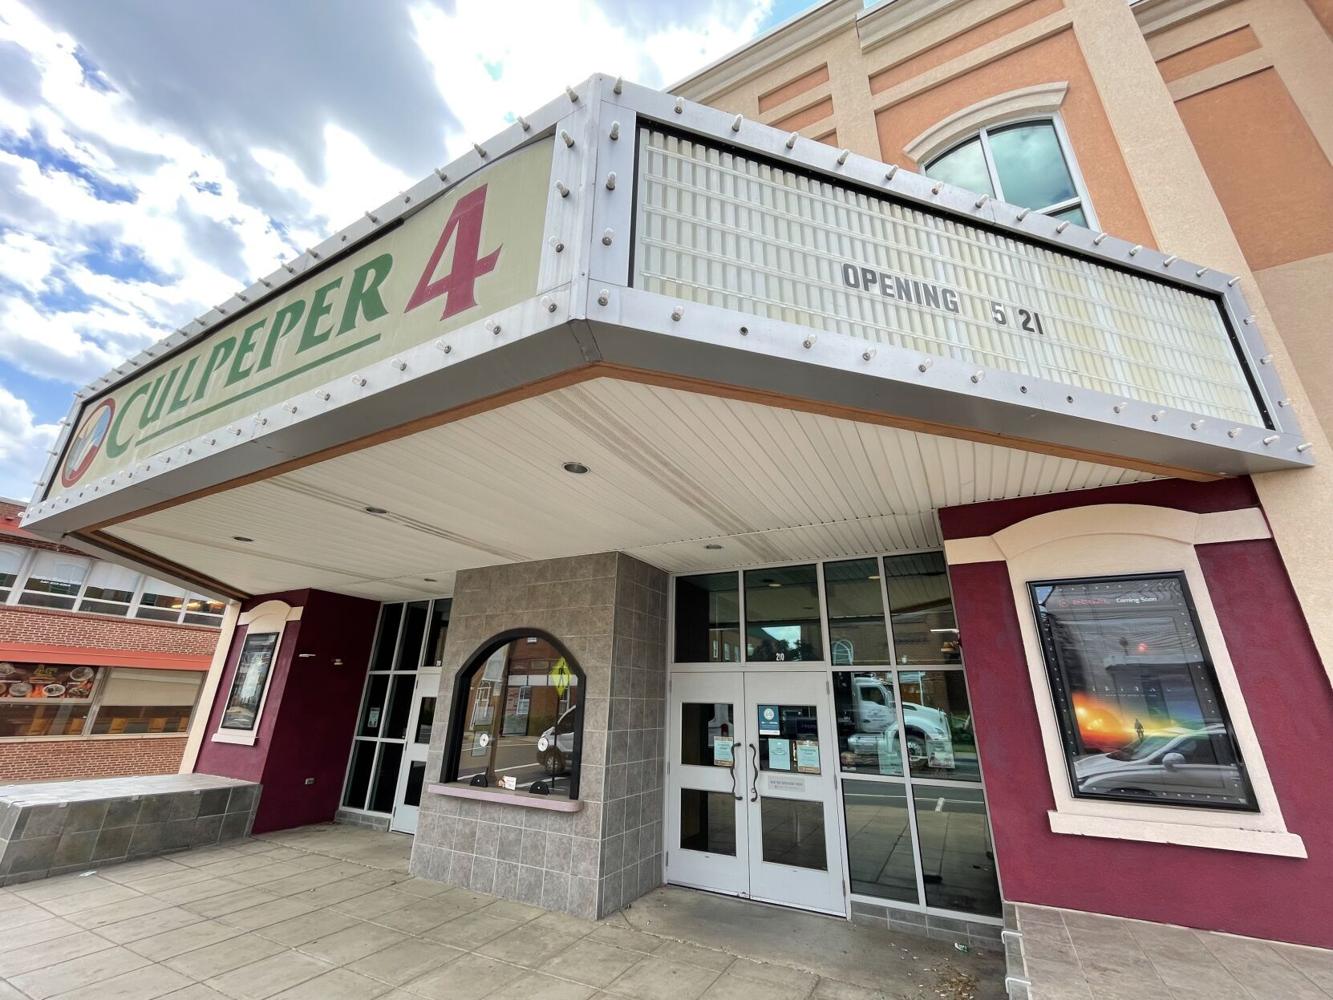 Culpeper movie theater reopening (for now) | Business | rappnews.com